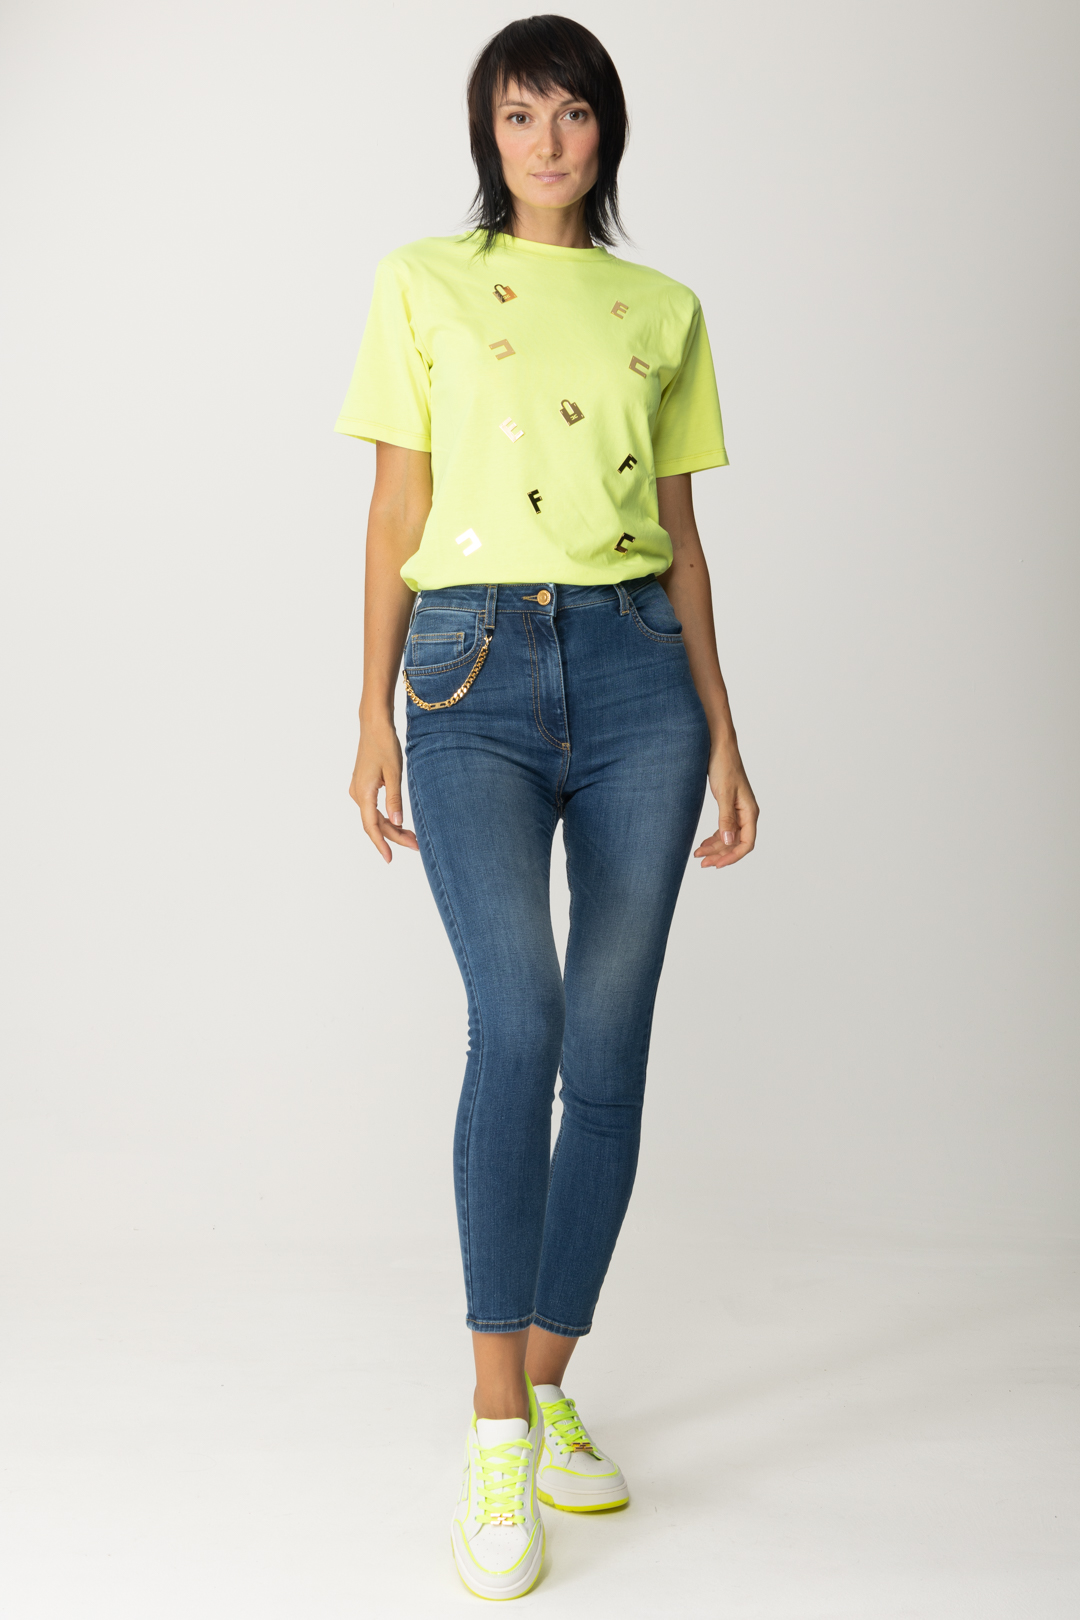 Preview: Elisabetta Franchi T-shirt with lettering plates LIME FLUO